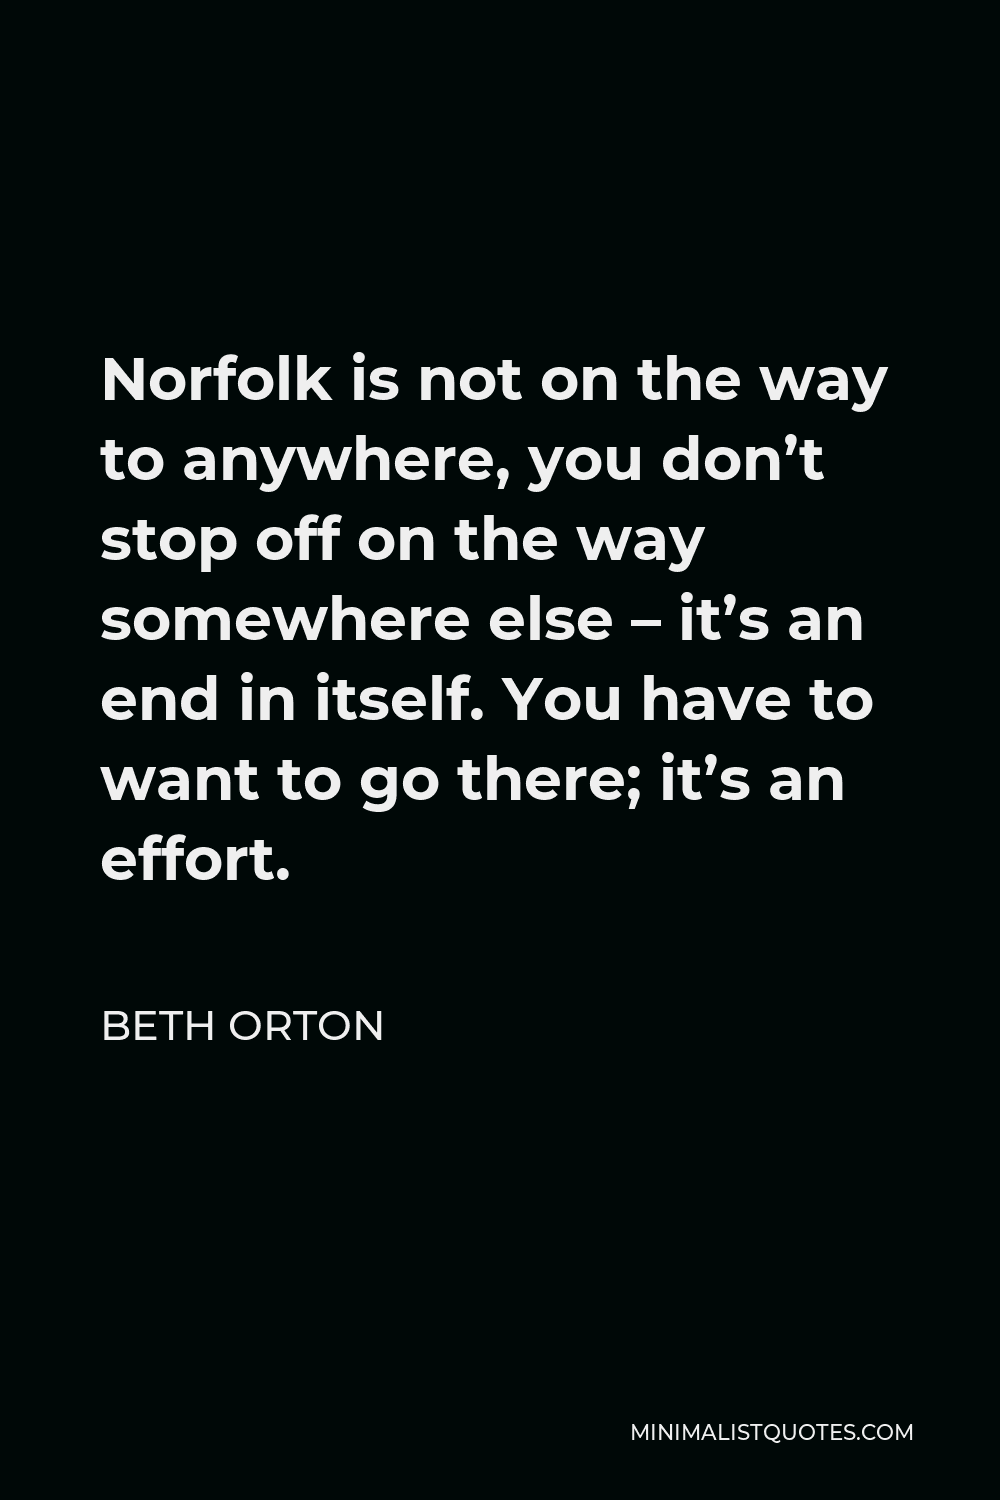 Beth Orton Quote - Norfolk is not on the way to anywhere, you don’t stop off on the way somewhere else – it’s an end in itself. You have to want to go there; it’s an effort.